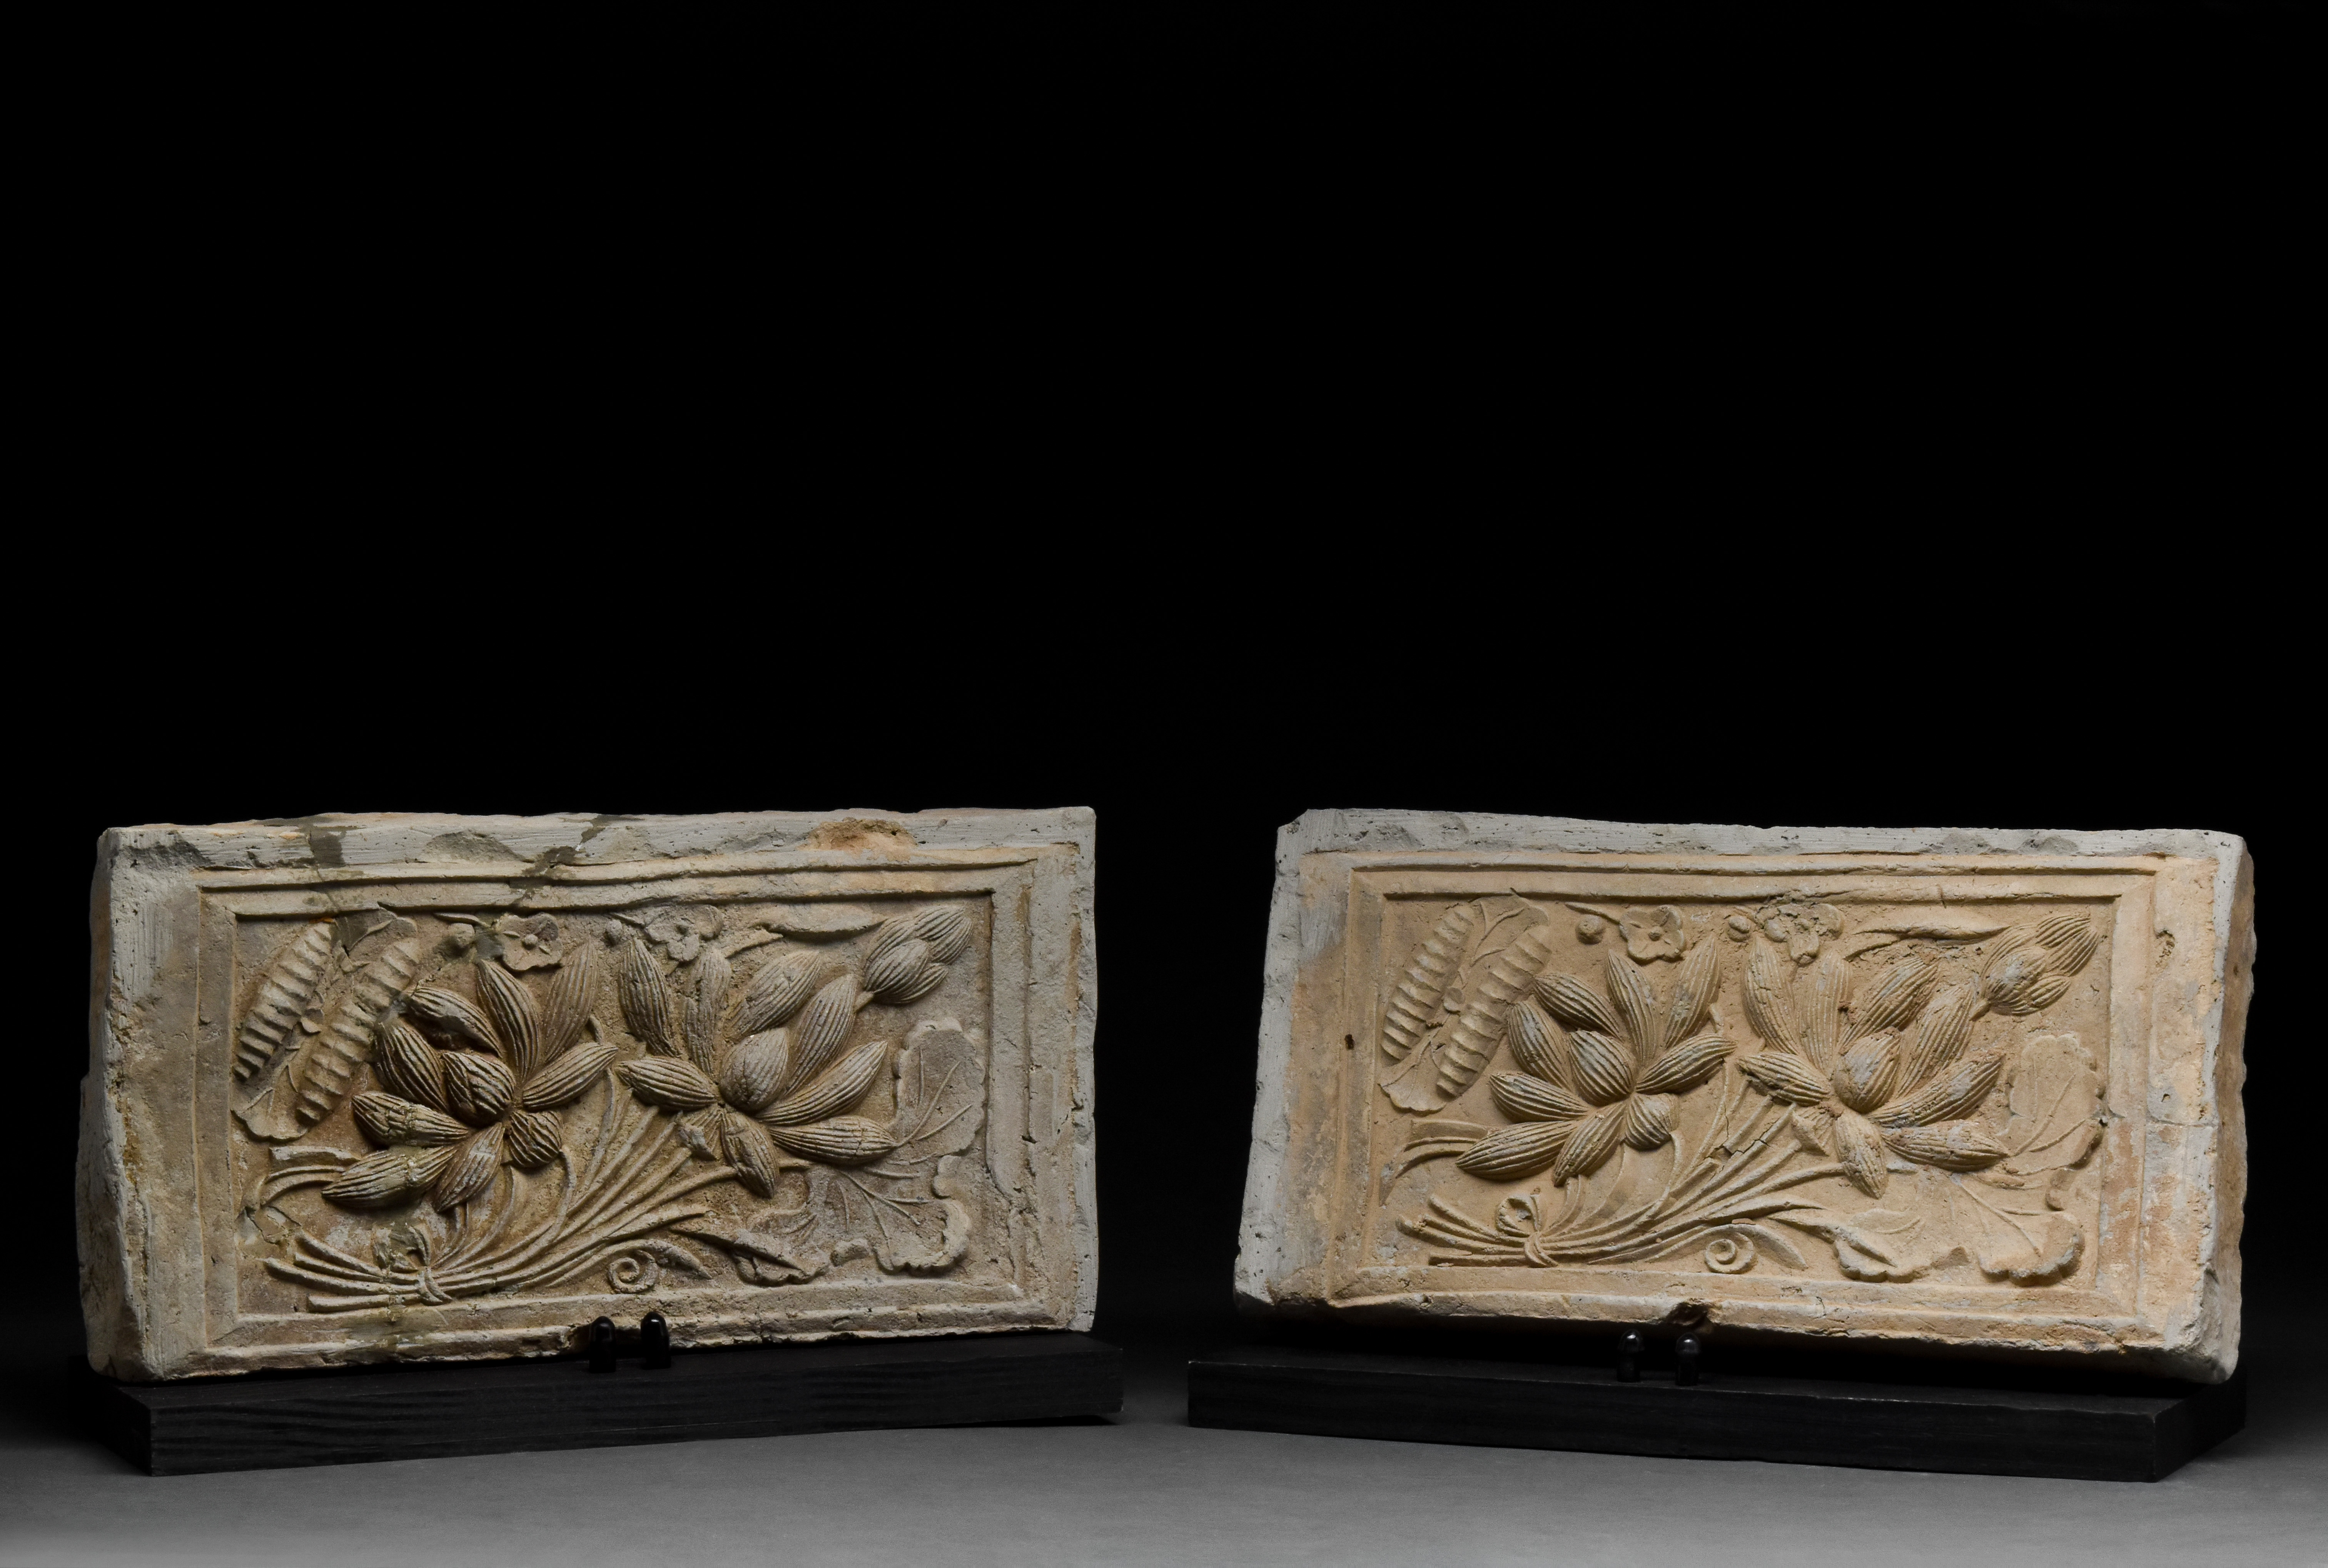 PAIR OF CHINESE SONG DYNASTY TERRACOTTA BRICKS